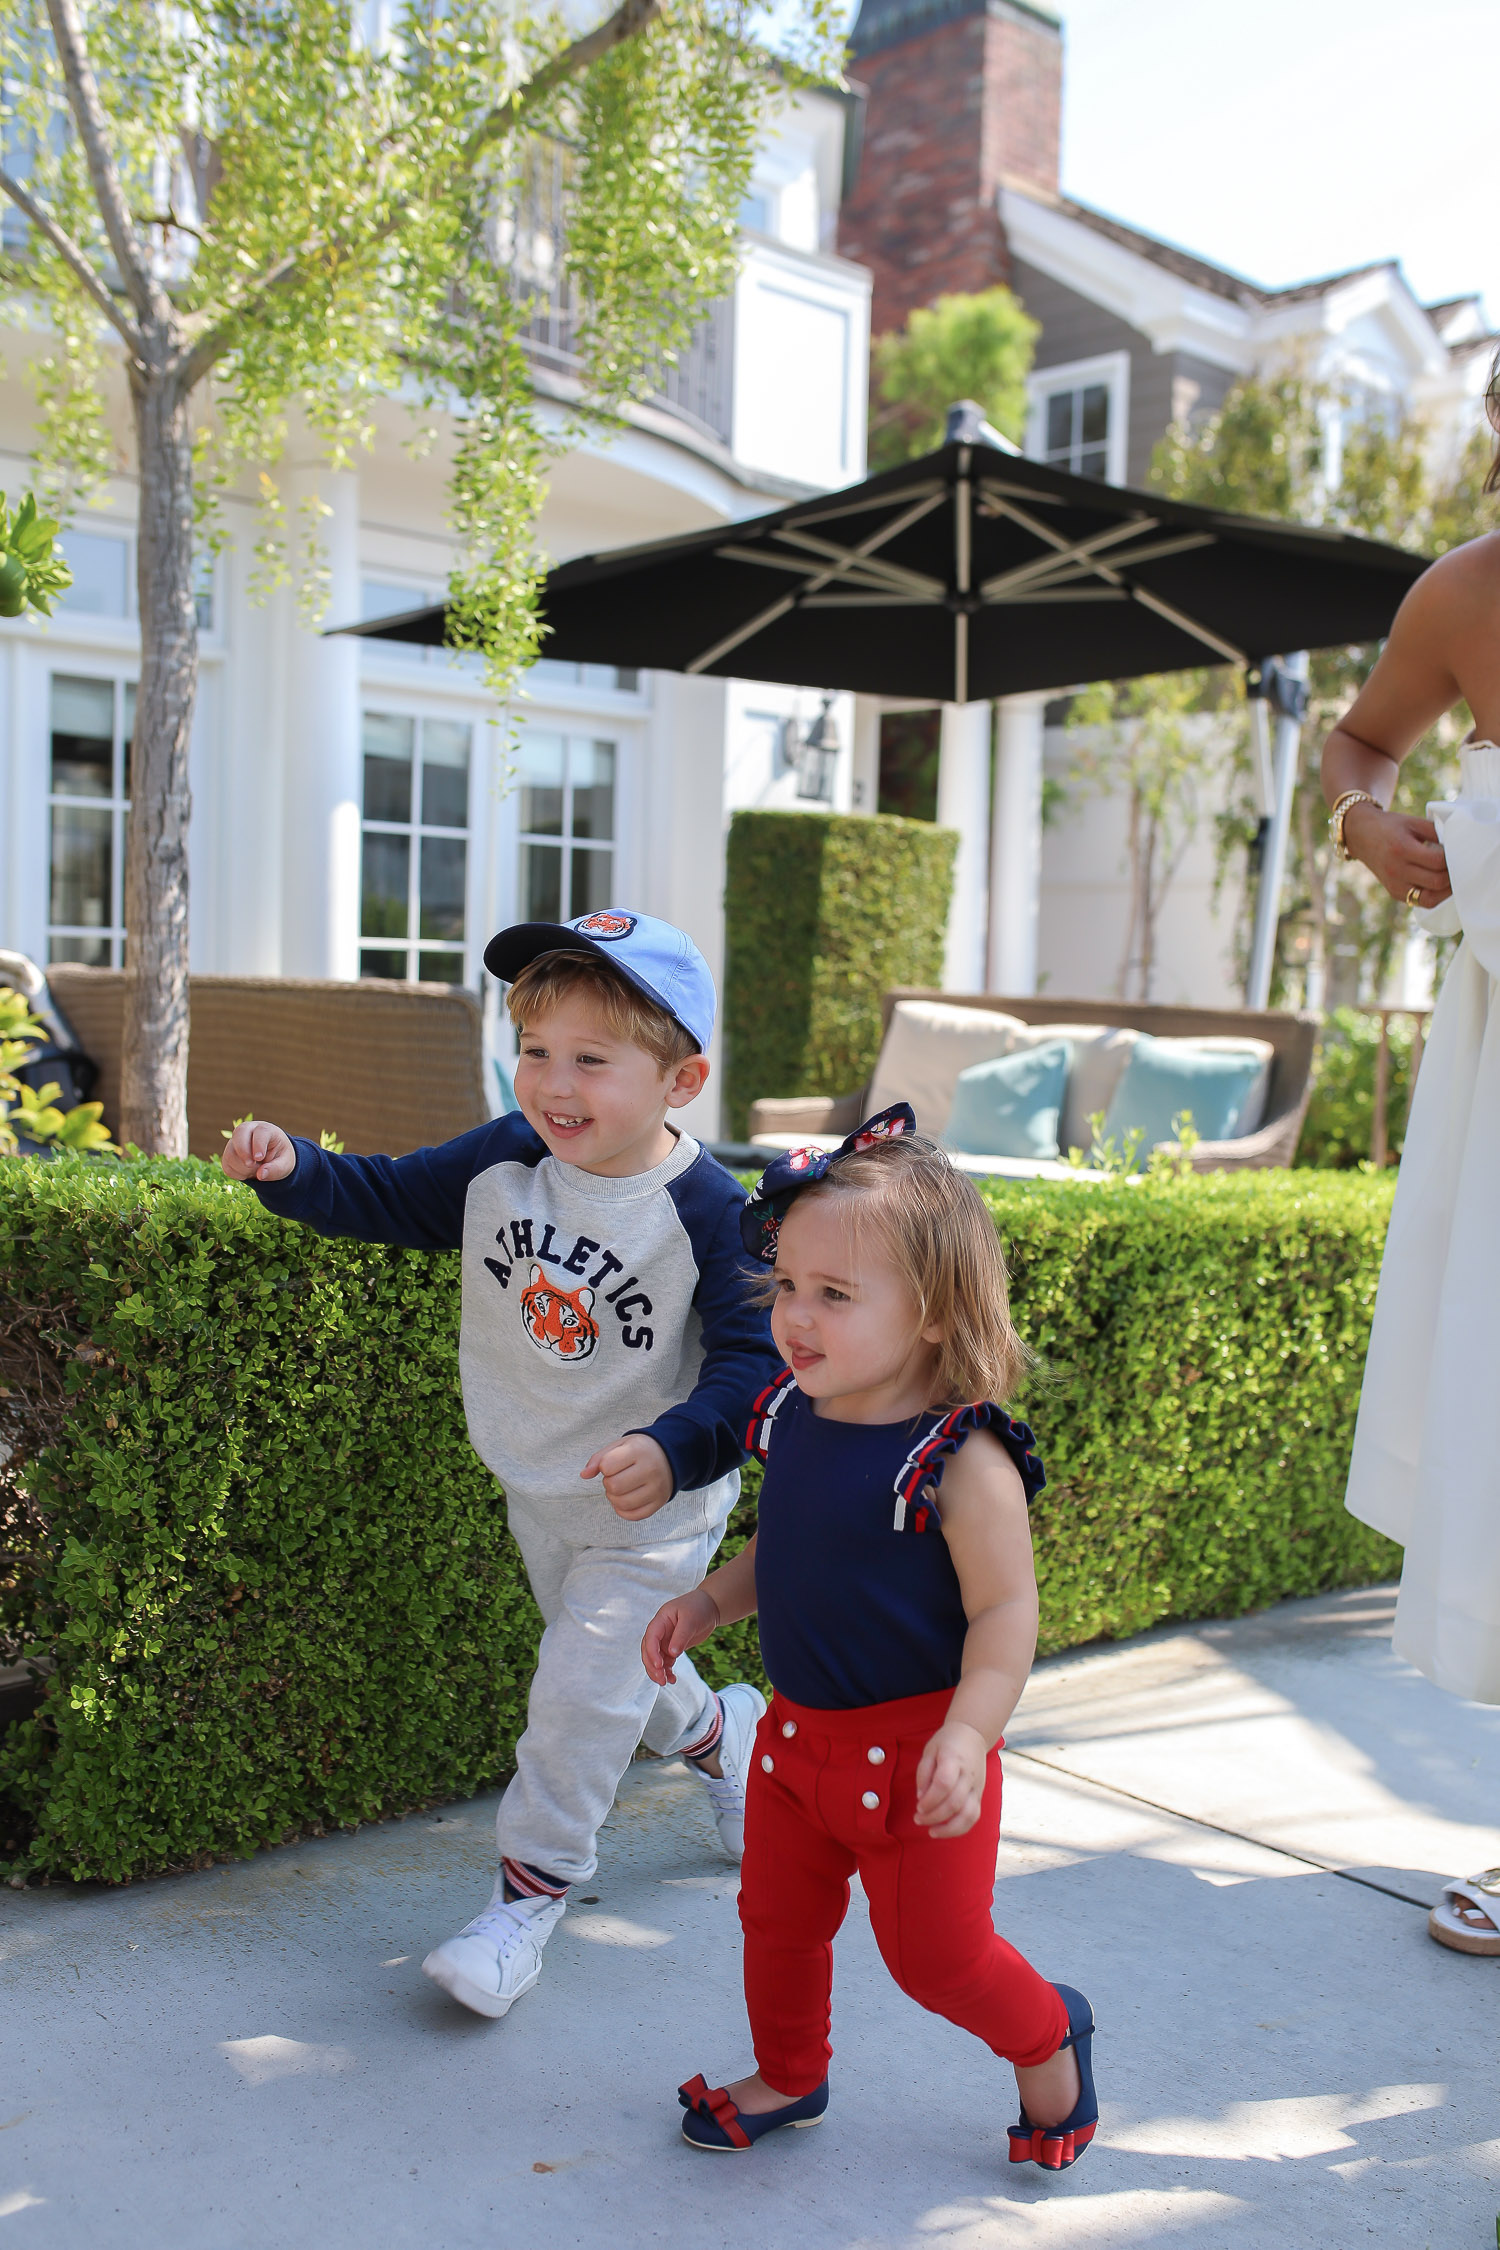 Janie and Jack by popular US fashion Blog, The Sweetest Thing: image of a mom and her two kids walking outside on a sidewalk in Newport Beach, CA and wearing a white one shoulder dress and white Channel slide sandals, Janie and Jack TIGER PATCH CAP, Janie and Jack RAGLAN TIGER SWEATSHIRT, Janie and Jack STRIPE TRIM JOGGER, Janie and Jack PLEATED SLEEVE TOP, Janie and Jack BUTTON PONTE PANT, Janie and Jack BOW ANKLE STRAP FLAT, FLORAL BOW BARRETTE, and Janie and Jack BOUCLÉ PURSE.